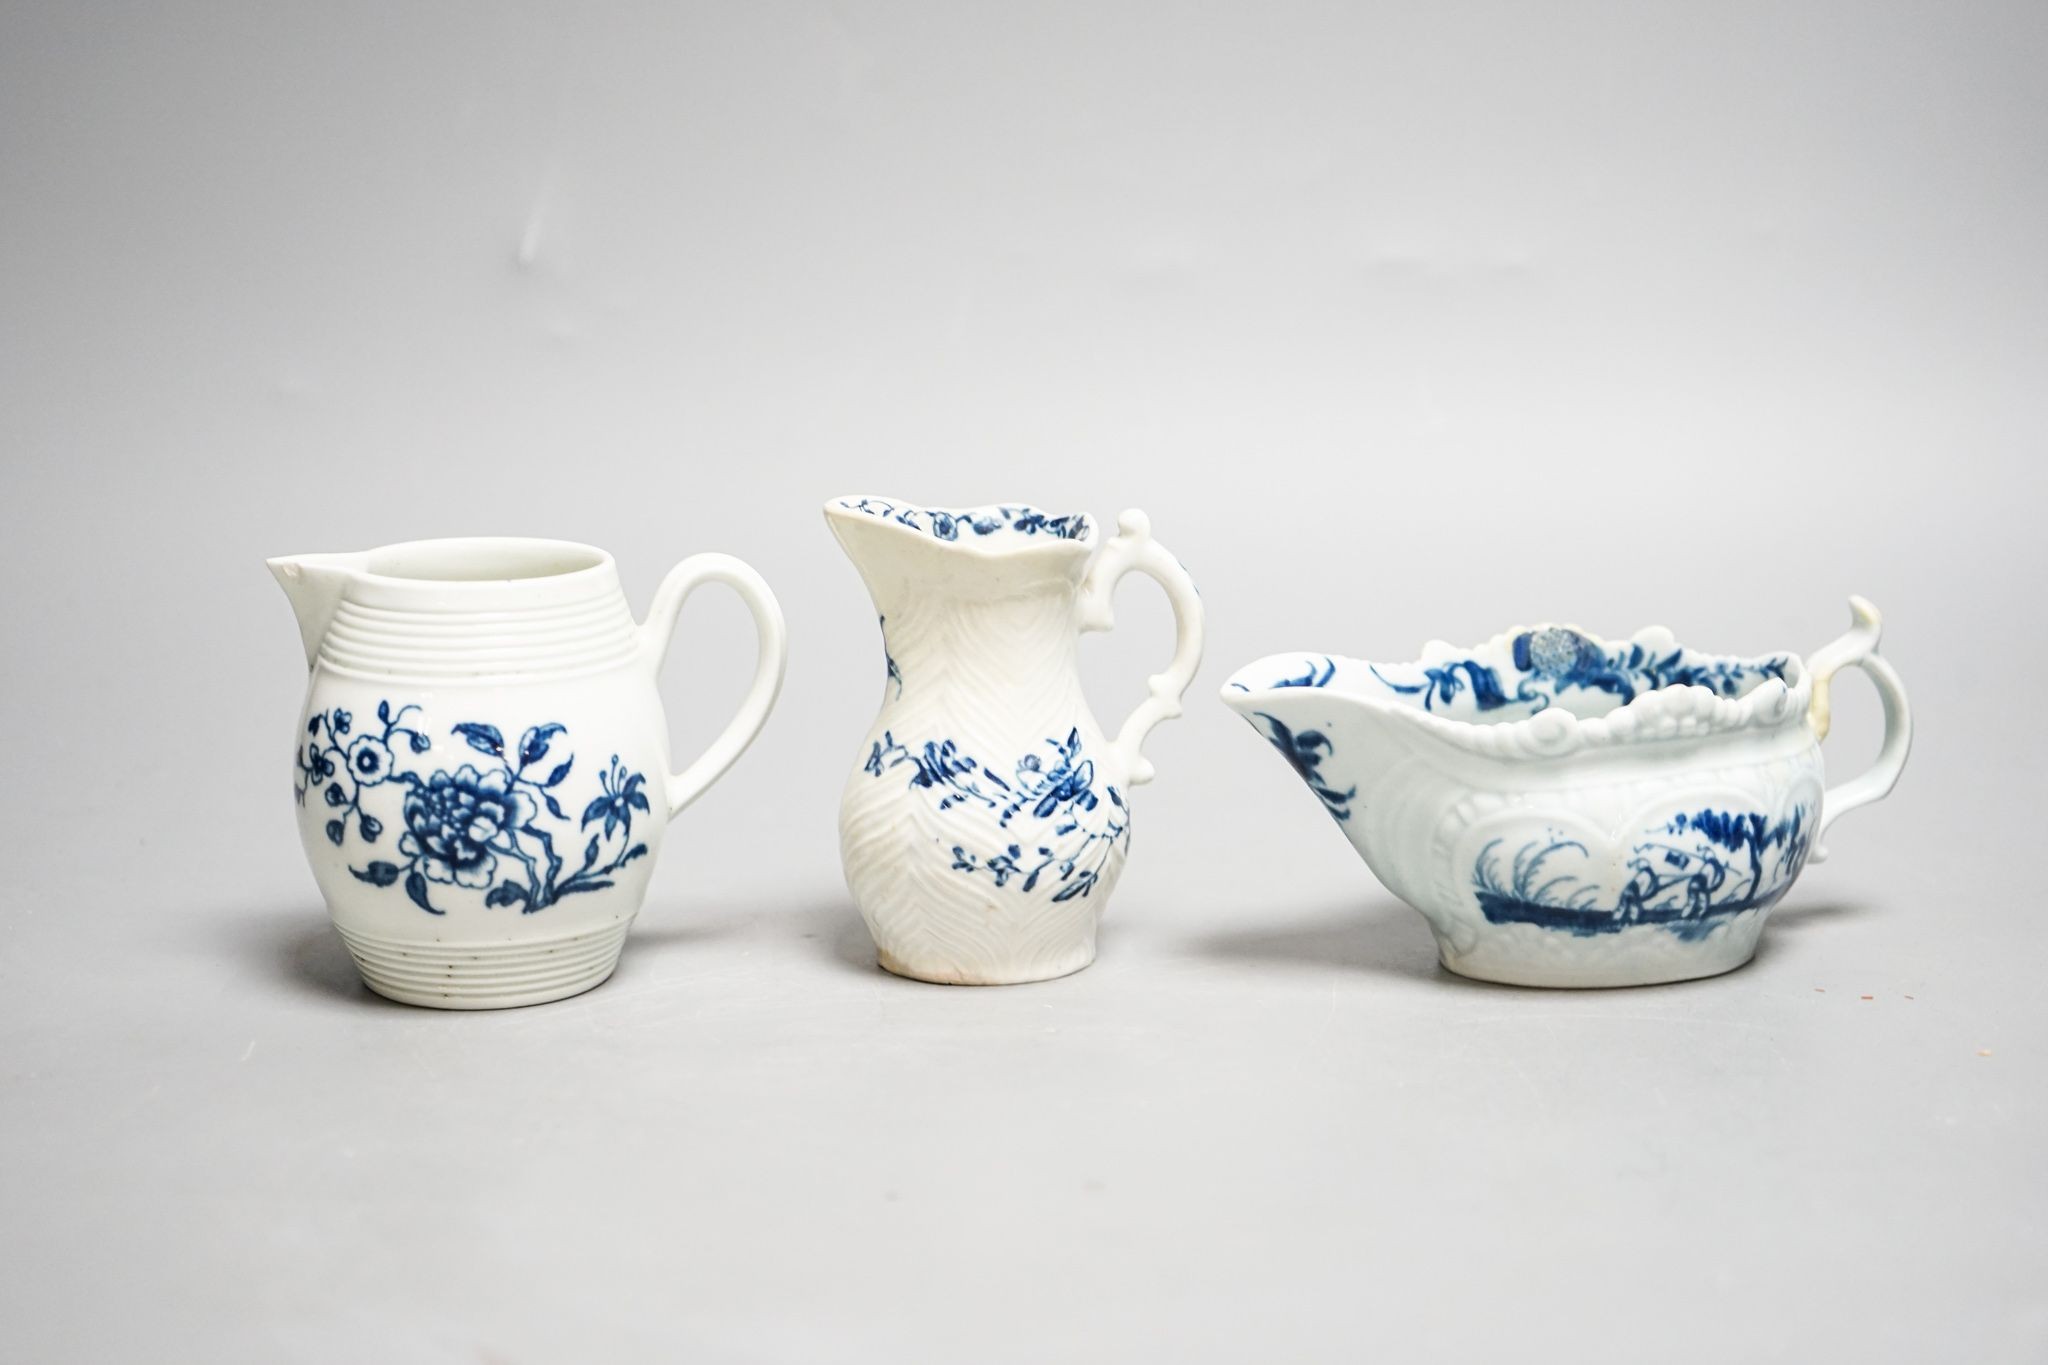 A Worcester blue and white sauceboat, sparrow beak milk jug and a Mansfield pattern milk jug, tallest 9 cm